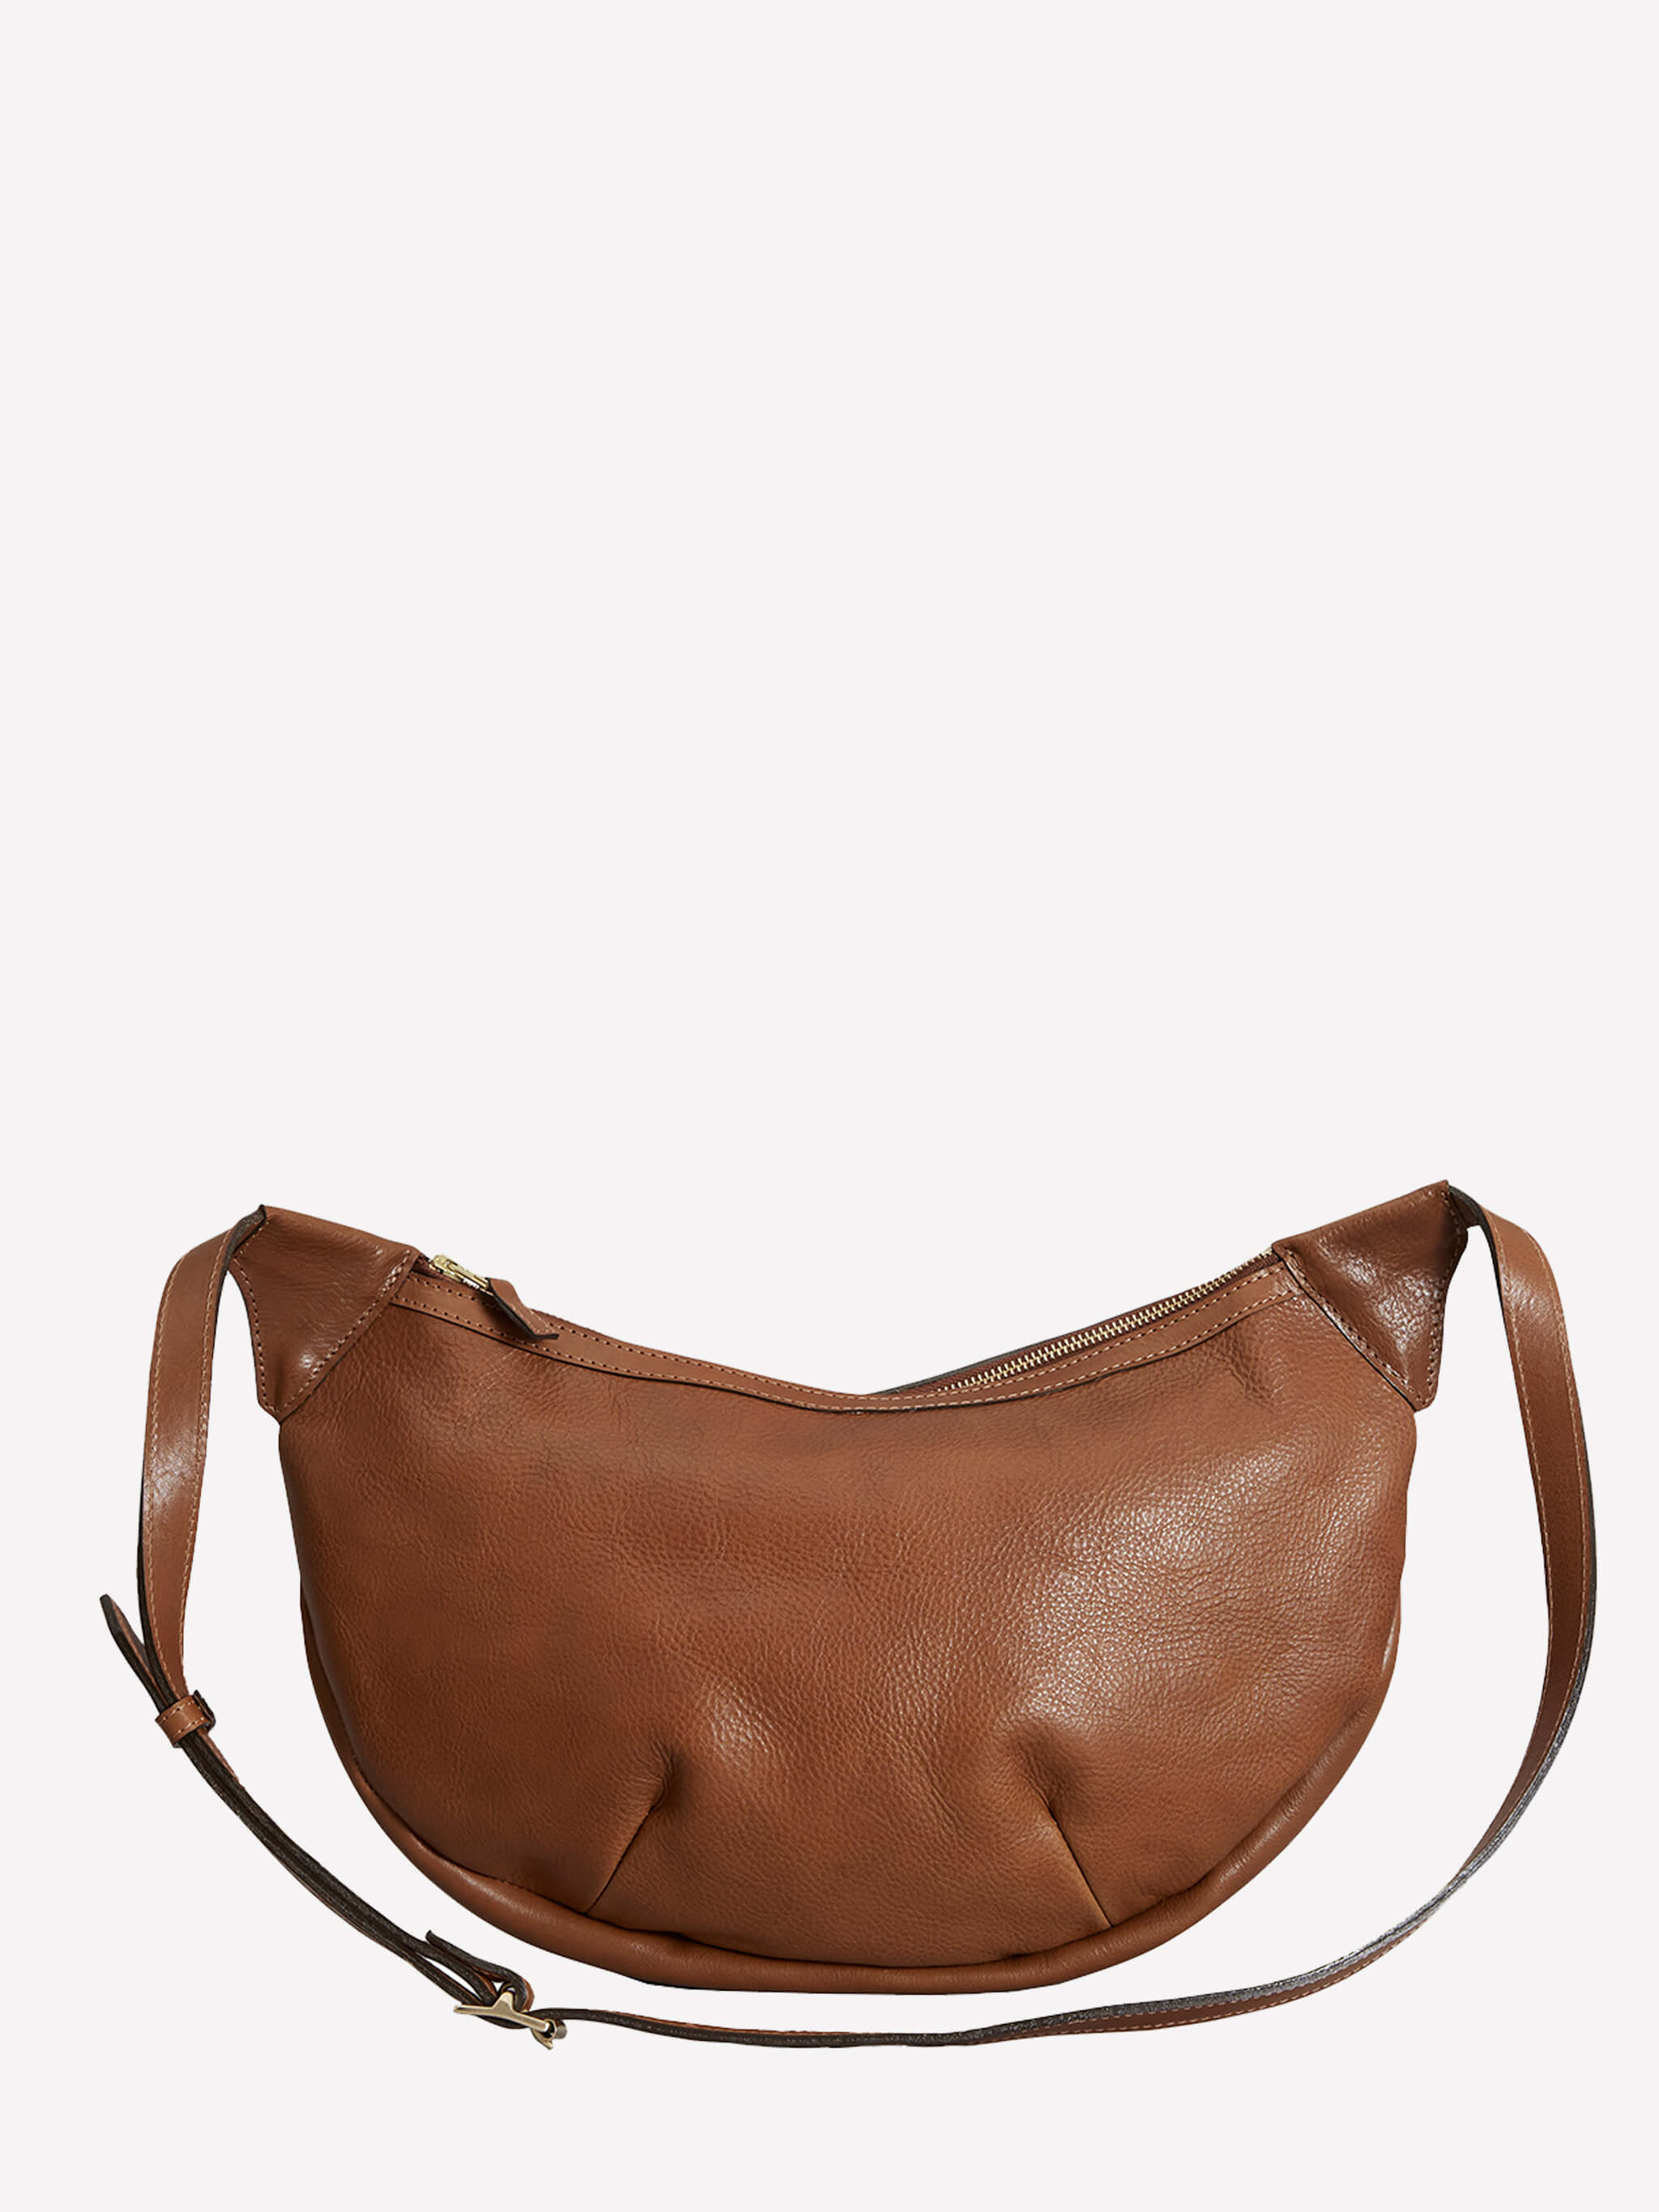 Mill Slouch Bag - Tan